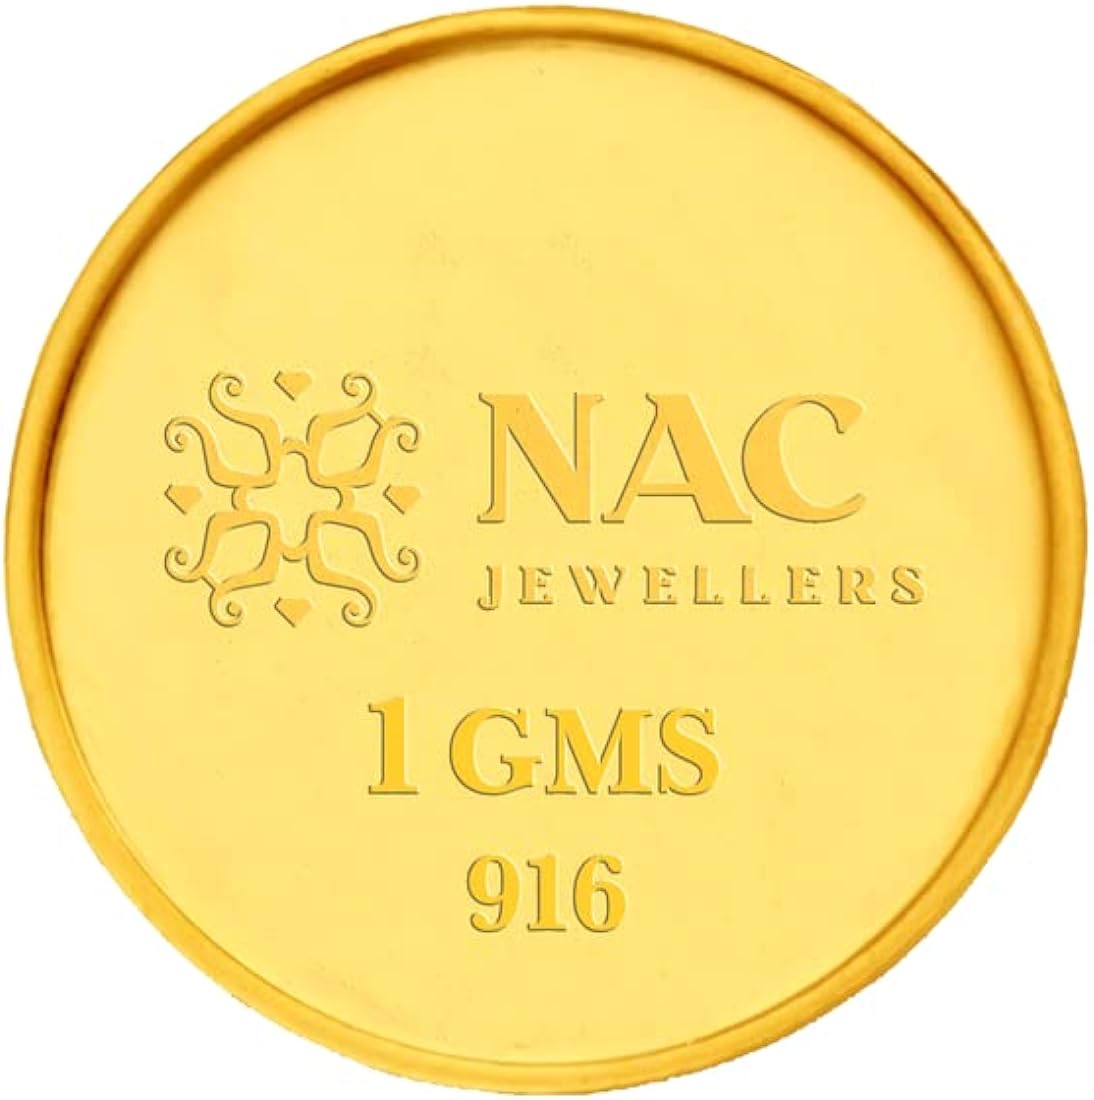 Gold coin with intricate design